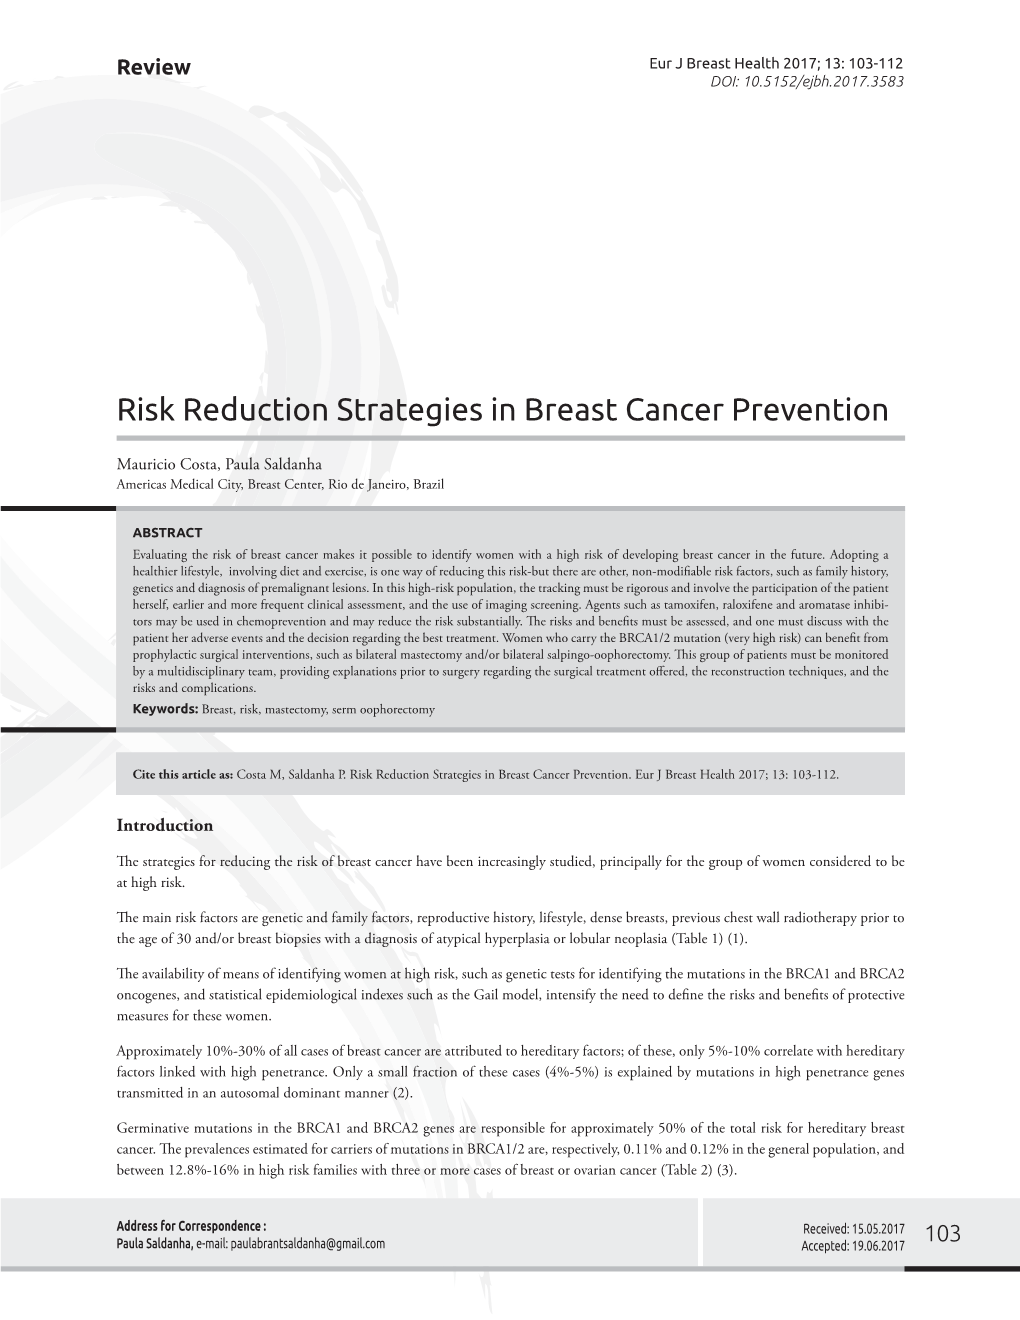 Risk Reduction Strategies in Breast Cancer Prevention